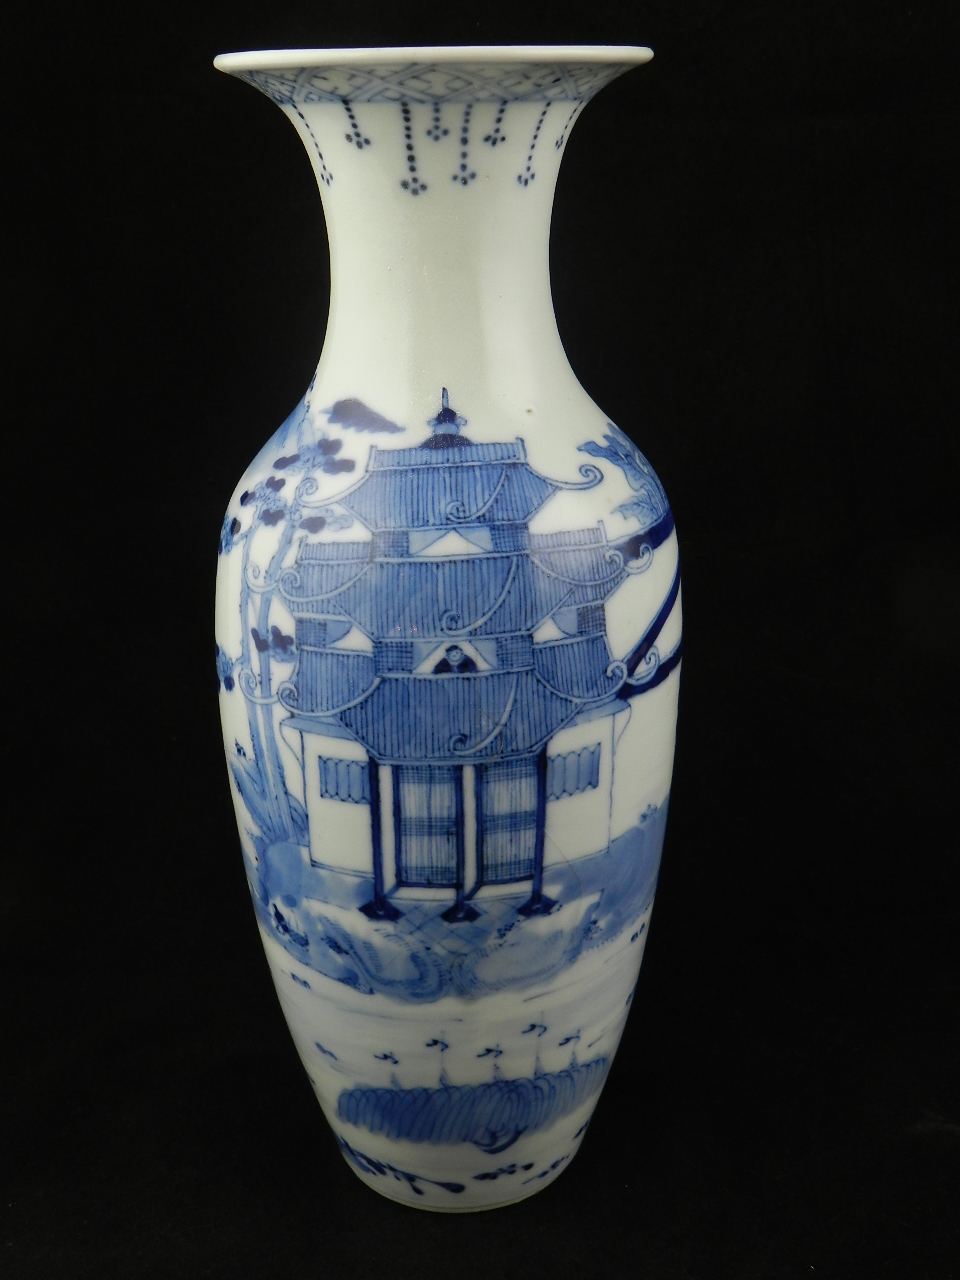 A 19th century Chinese blue and white slim baluster shape vase with everted rim decorated all